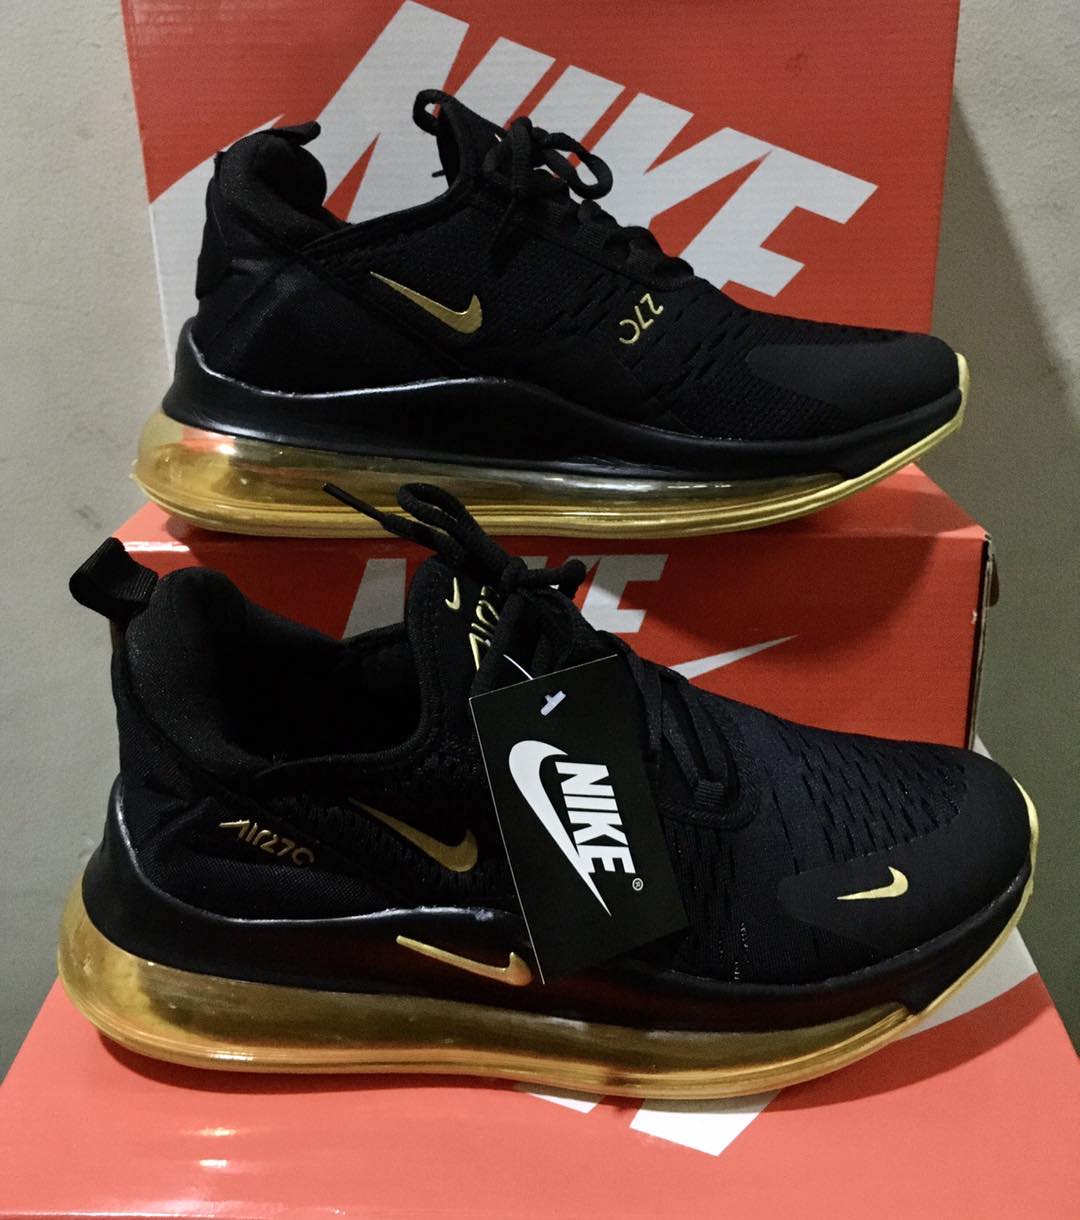 nIKE AIRMAX 720 SPORTS SHOES FOR MEN 